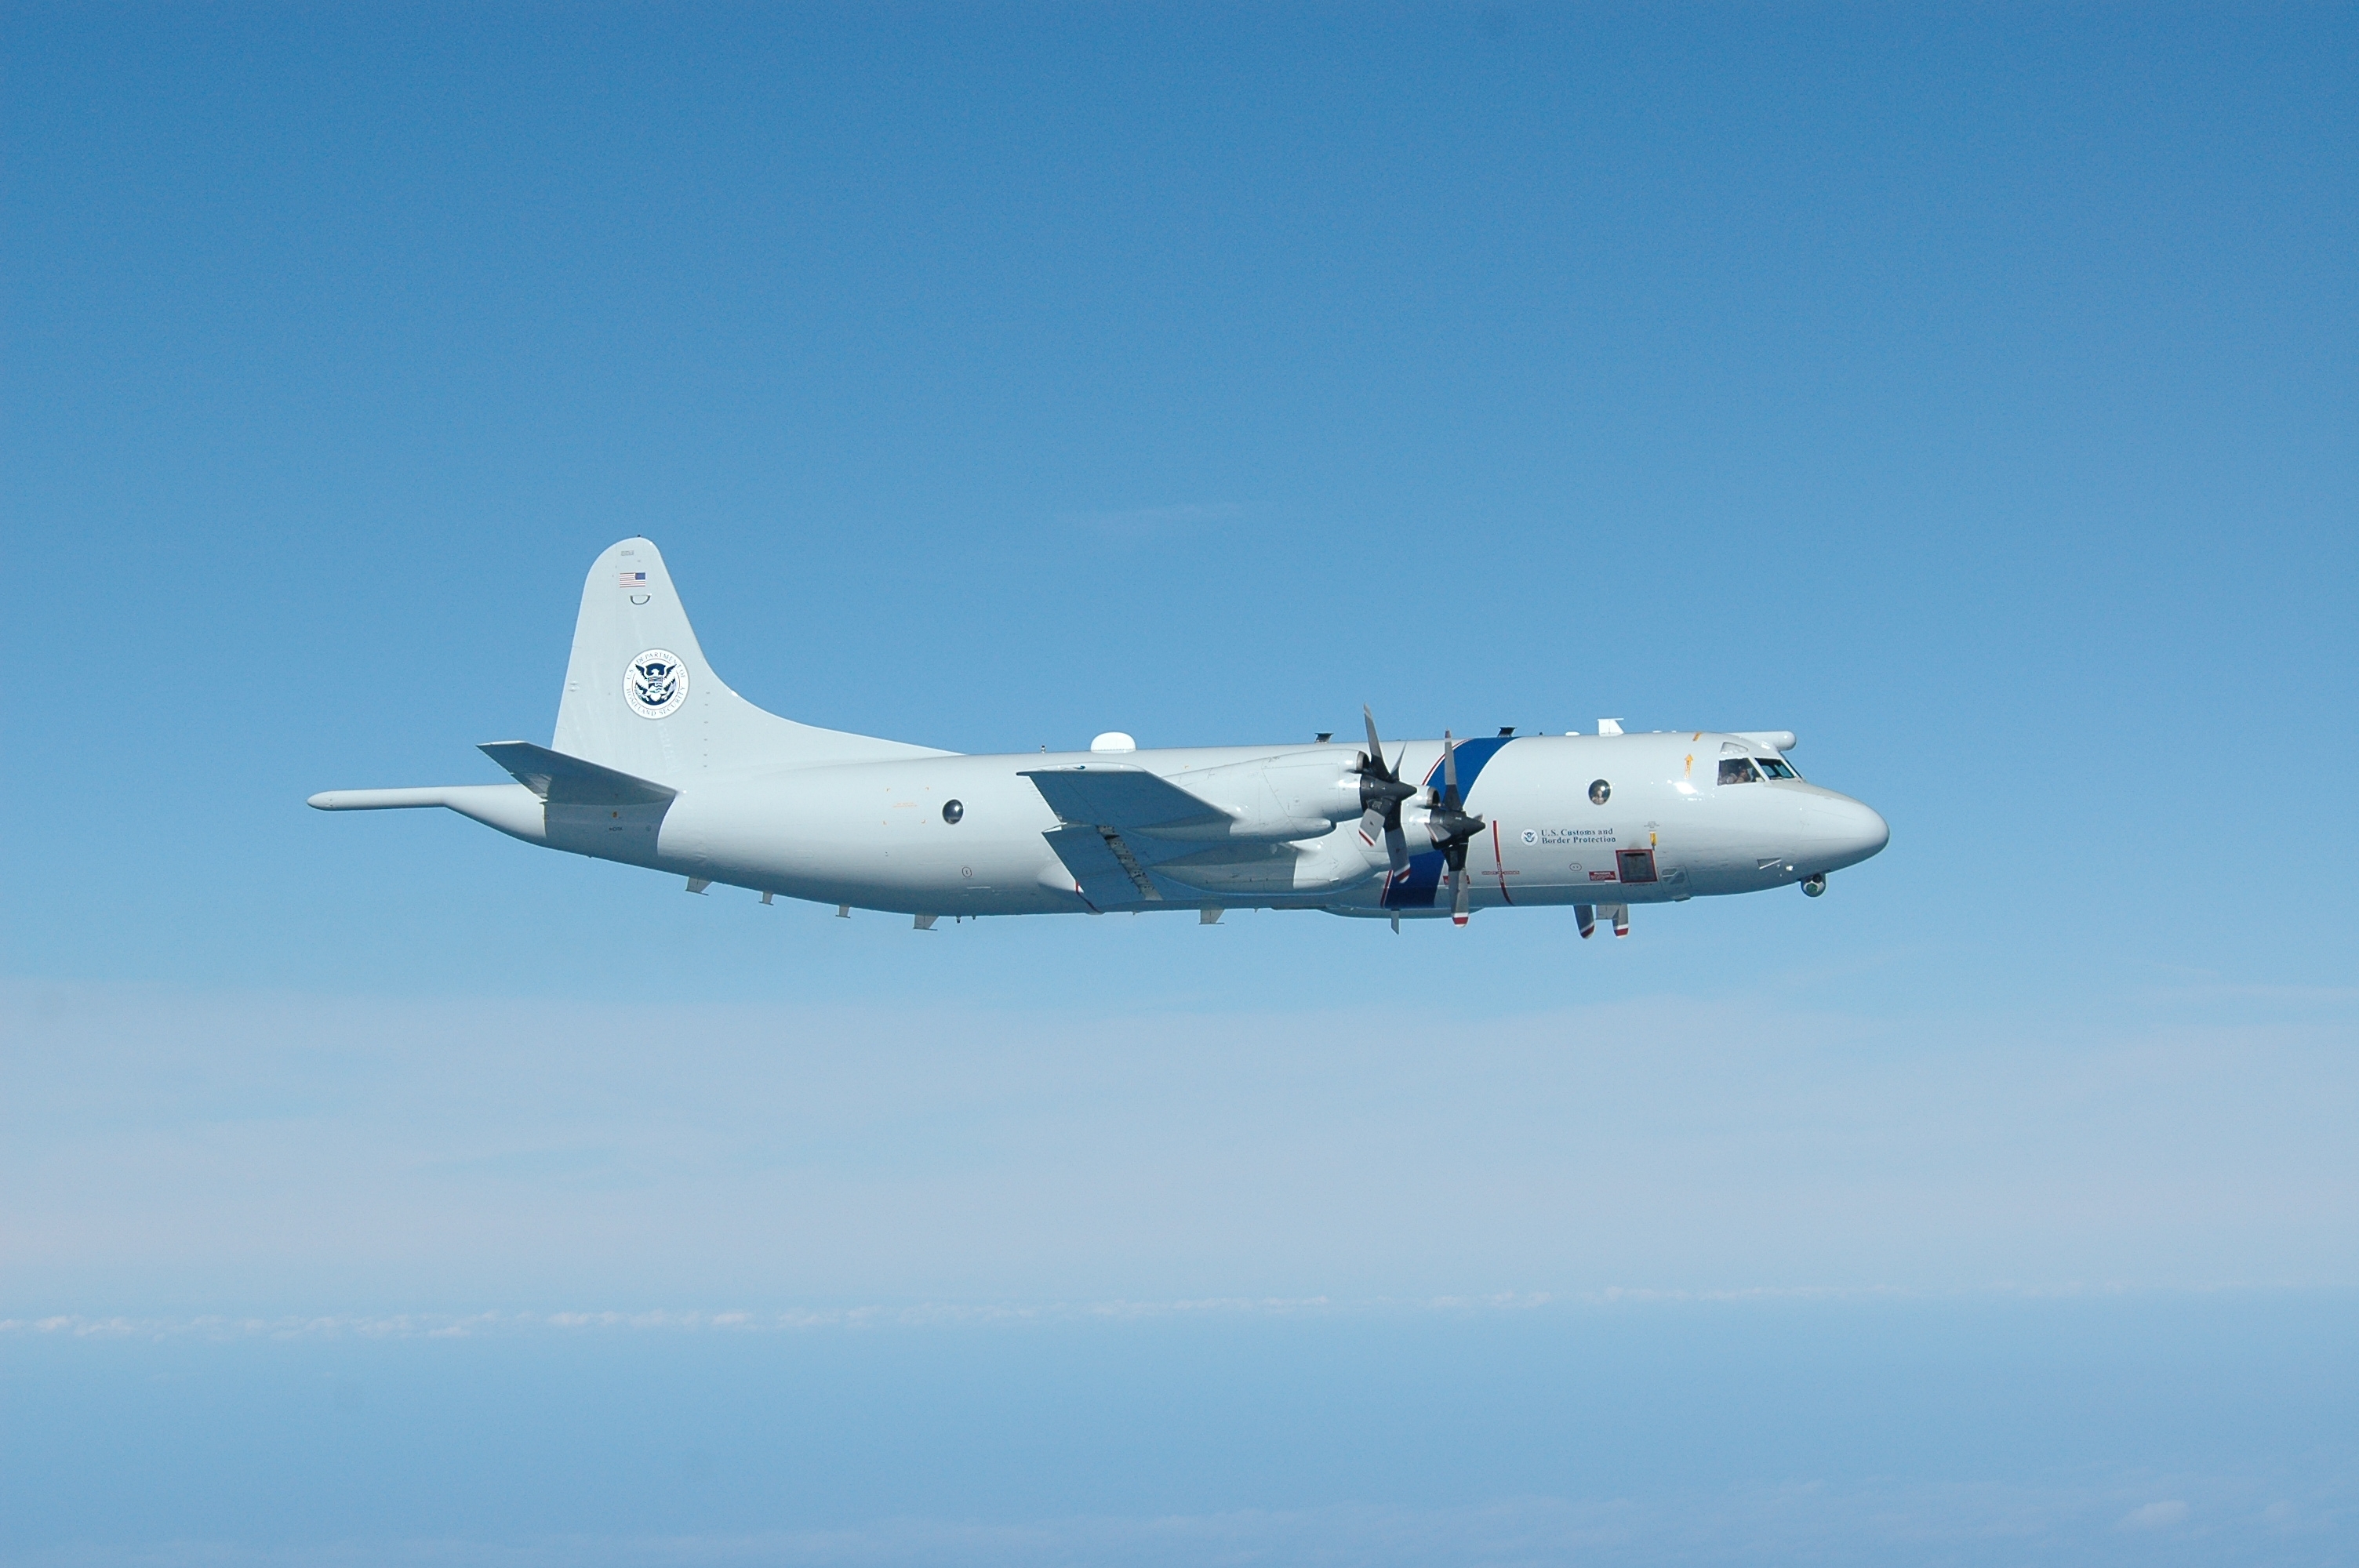 The P-3 Long Range Tracker Aircraft detects and tracks multiple targets and the accompanying aircraft intercepts, identifies and tracks those suspect targets.